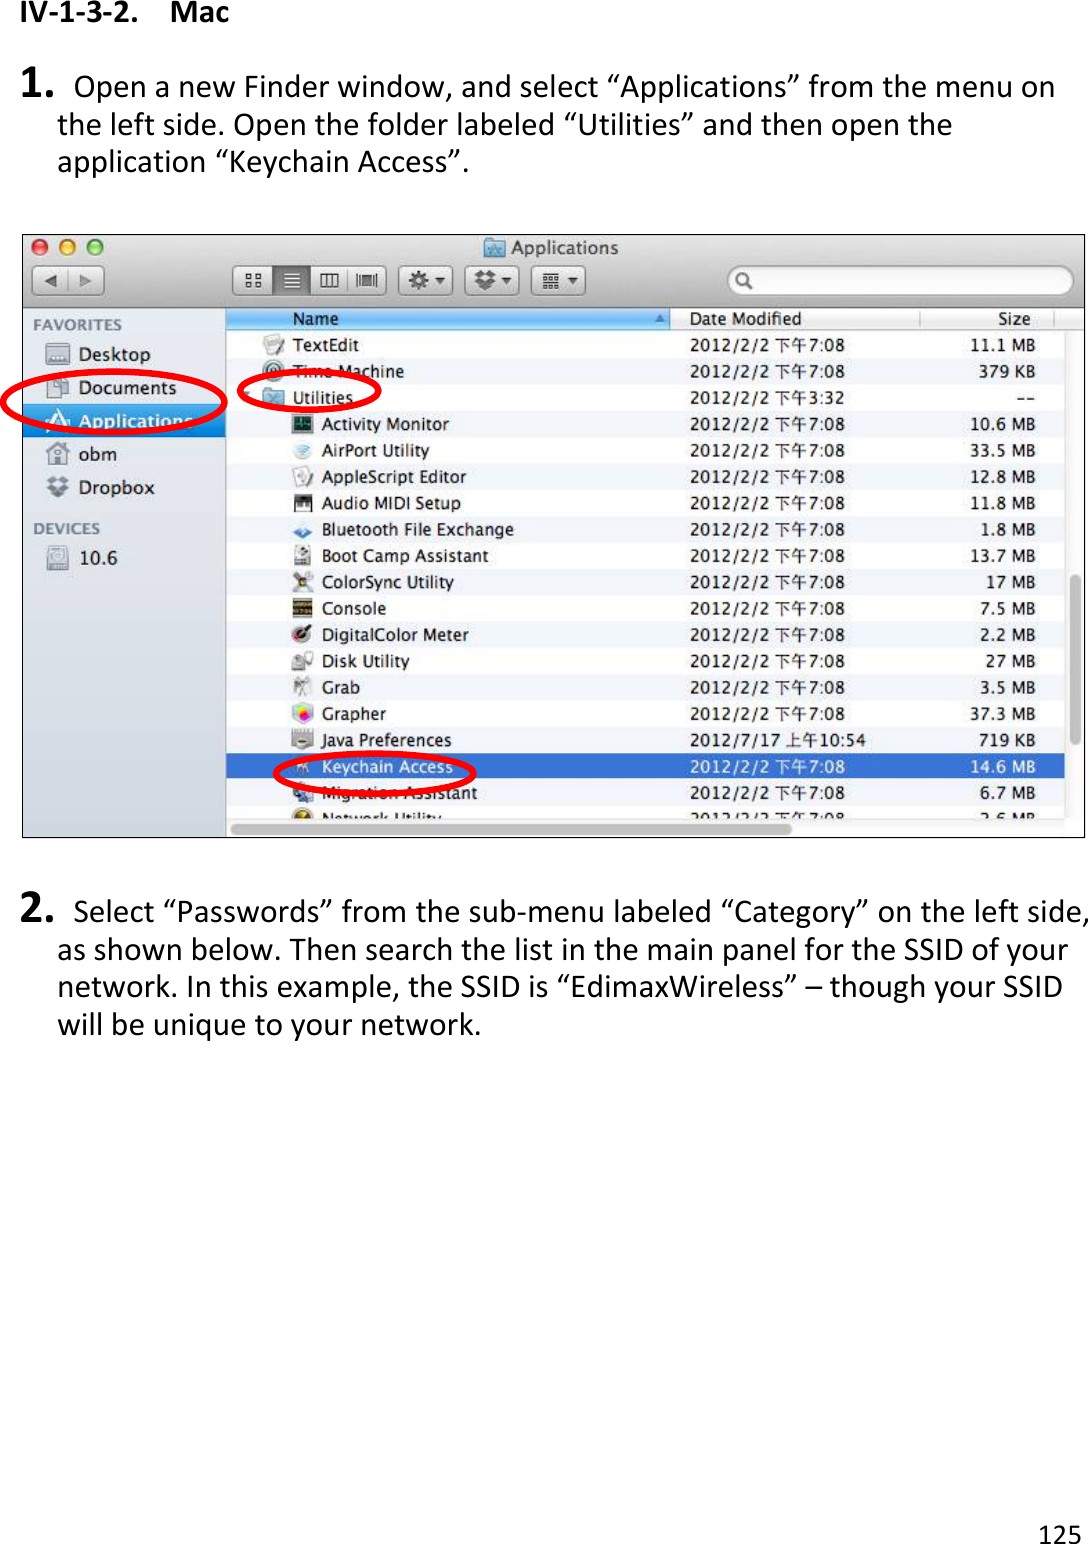 125  IV-1-3-2.  Mac  1.   Open a new Finder window, and select “Applications” from the menu on the left side. Open the folder labeled “Utilities” and then open the application “Keychain Access”.    2.   Select “Passwords” from the sub-menu labeled “Category” on the left side, as shown below. Then search the list in the main panel for the SSID of your network. In this example, the SSID is “EdimaxWireless” – though your SSID will be unique to your network.  